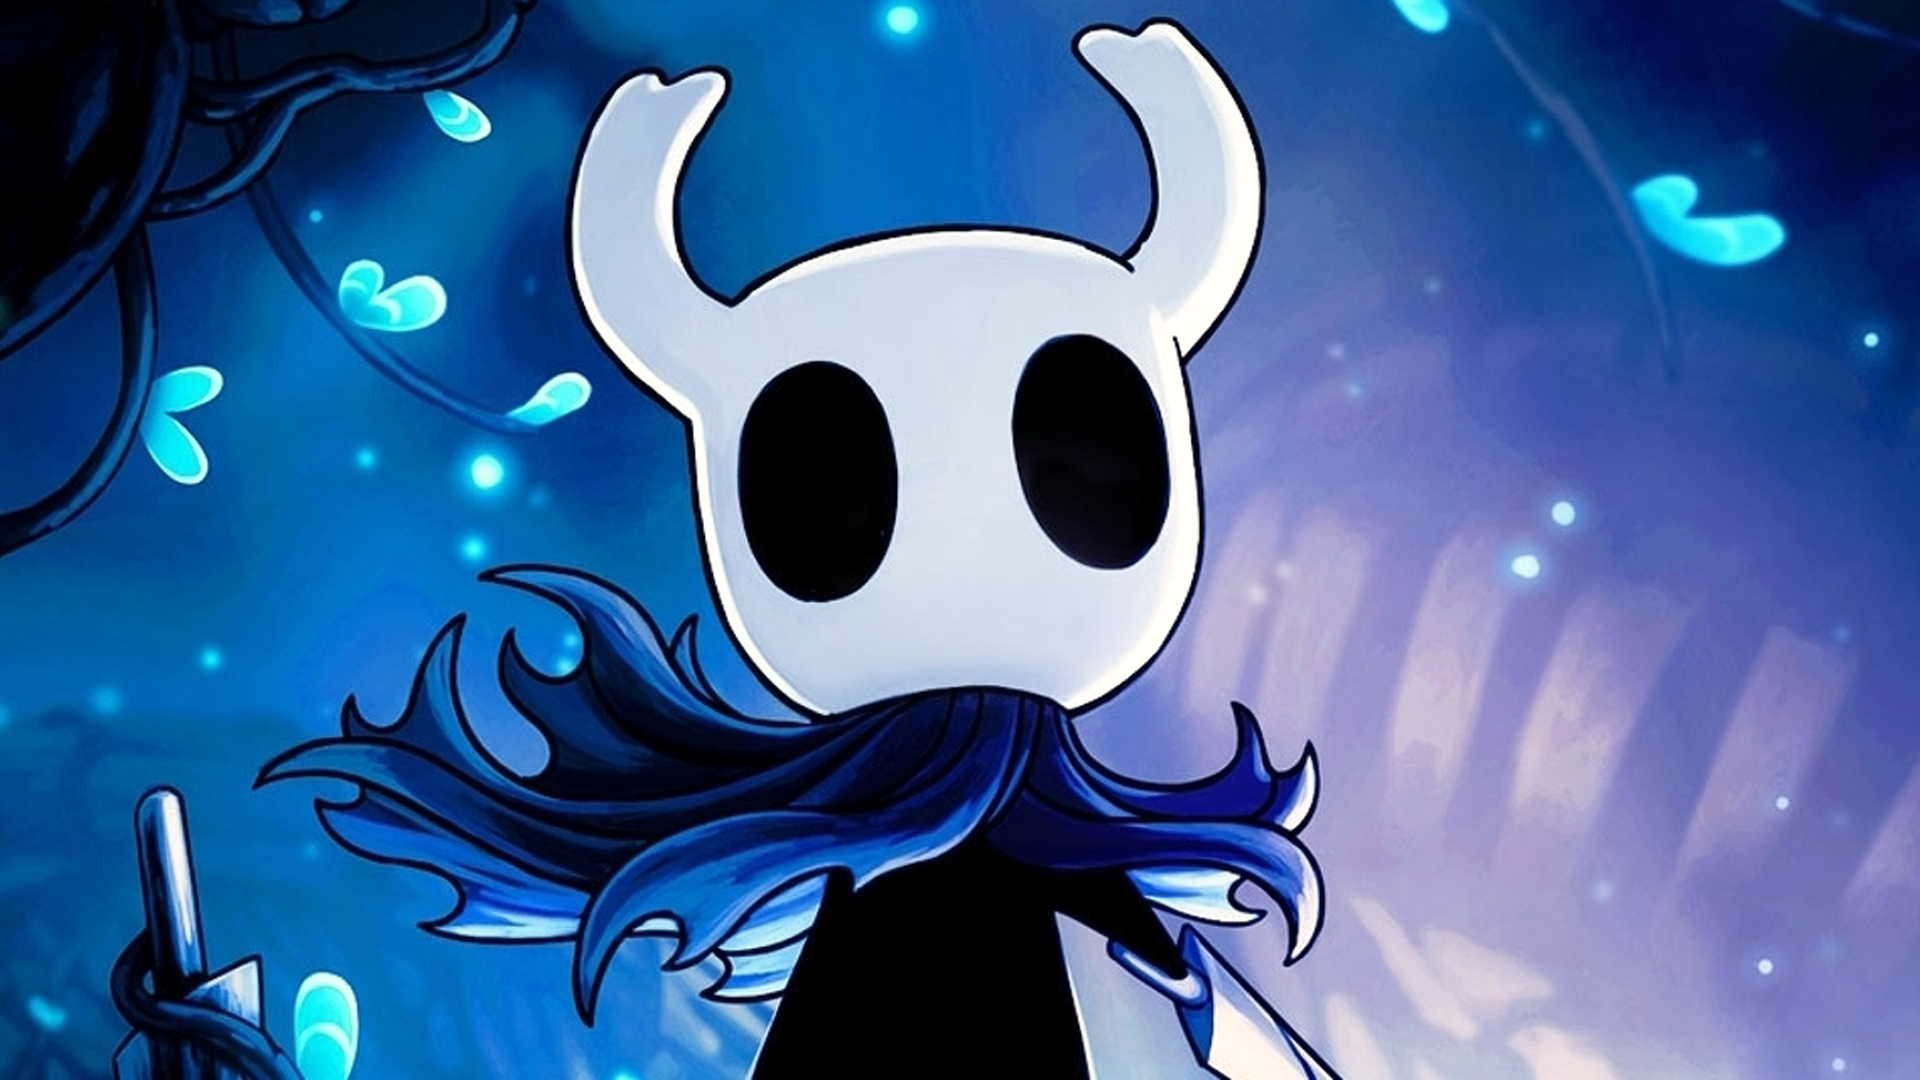 Hollow Knight broke its all-time player record and no-one